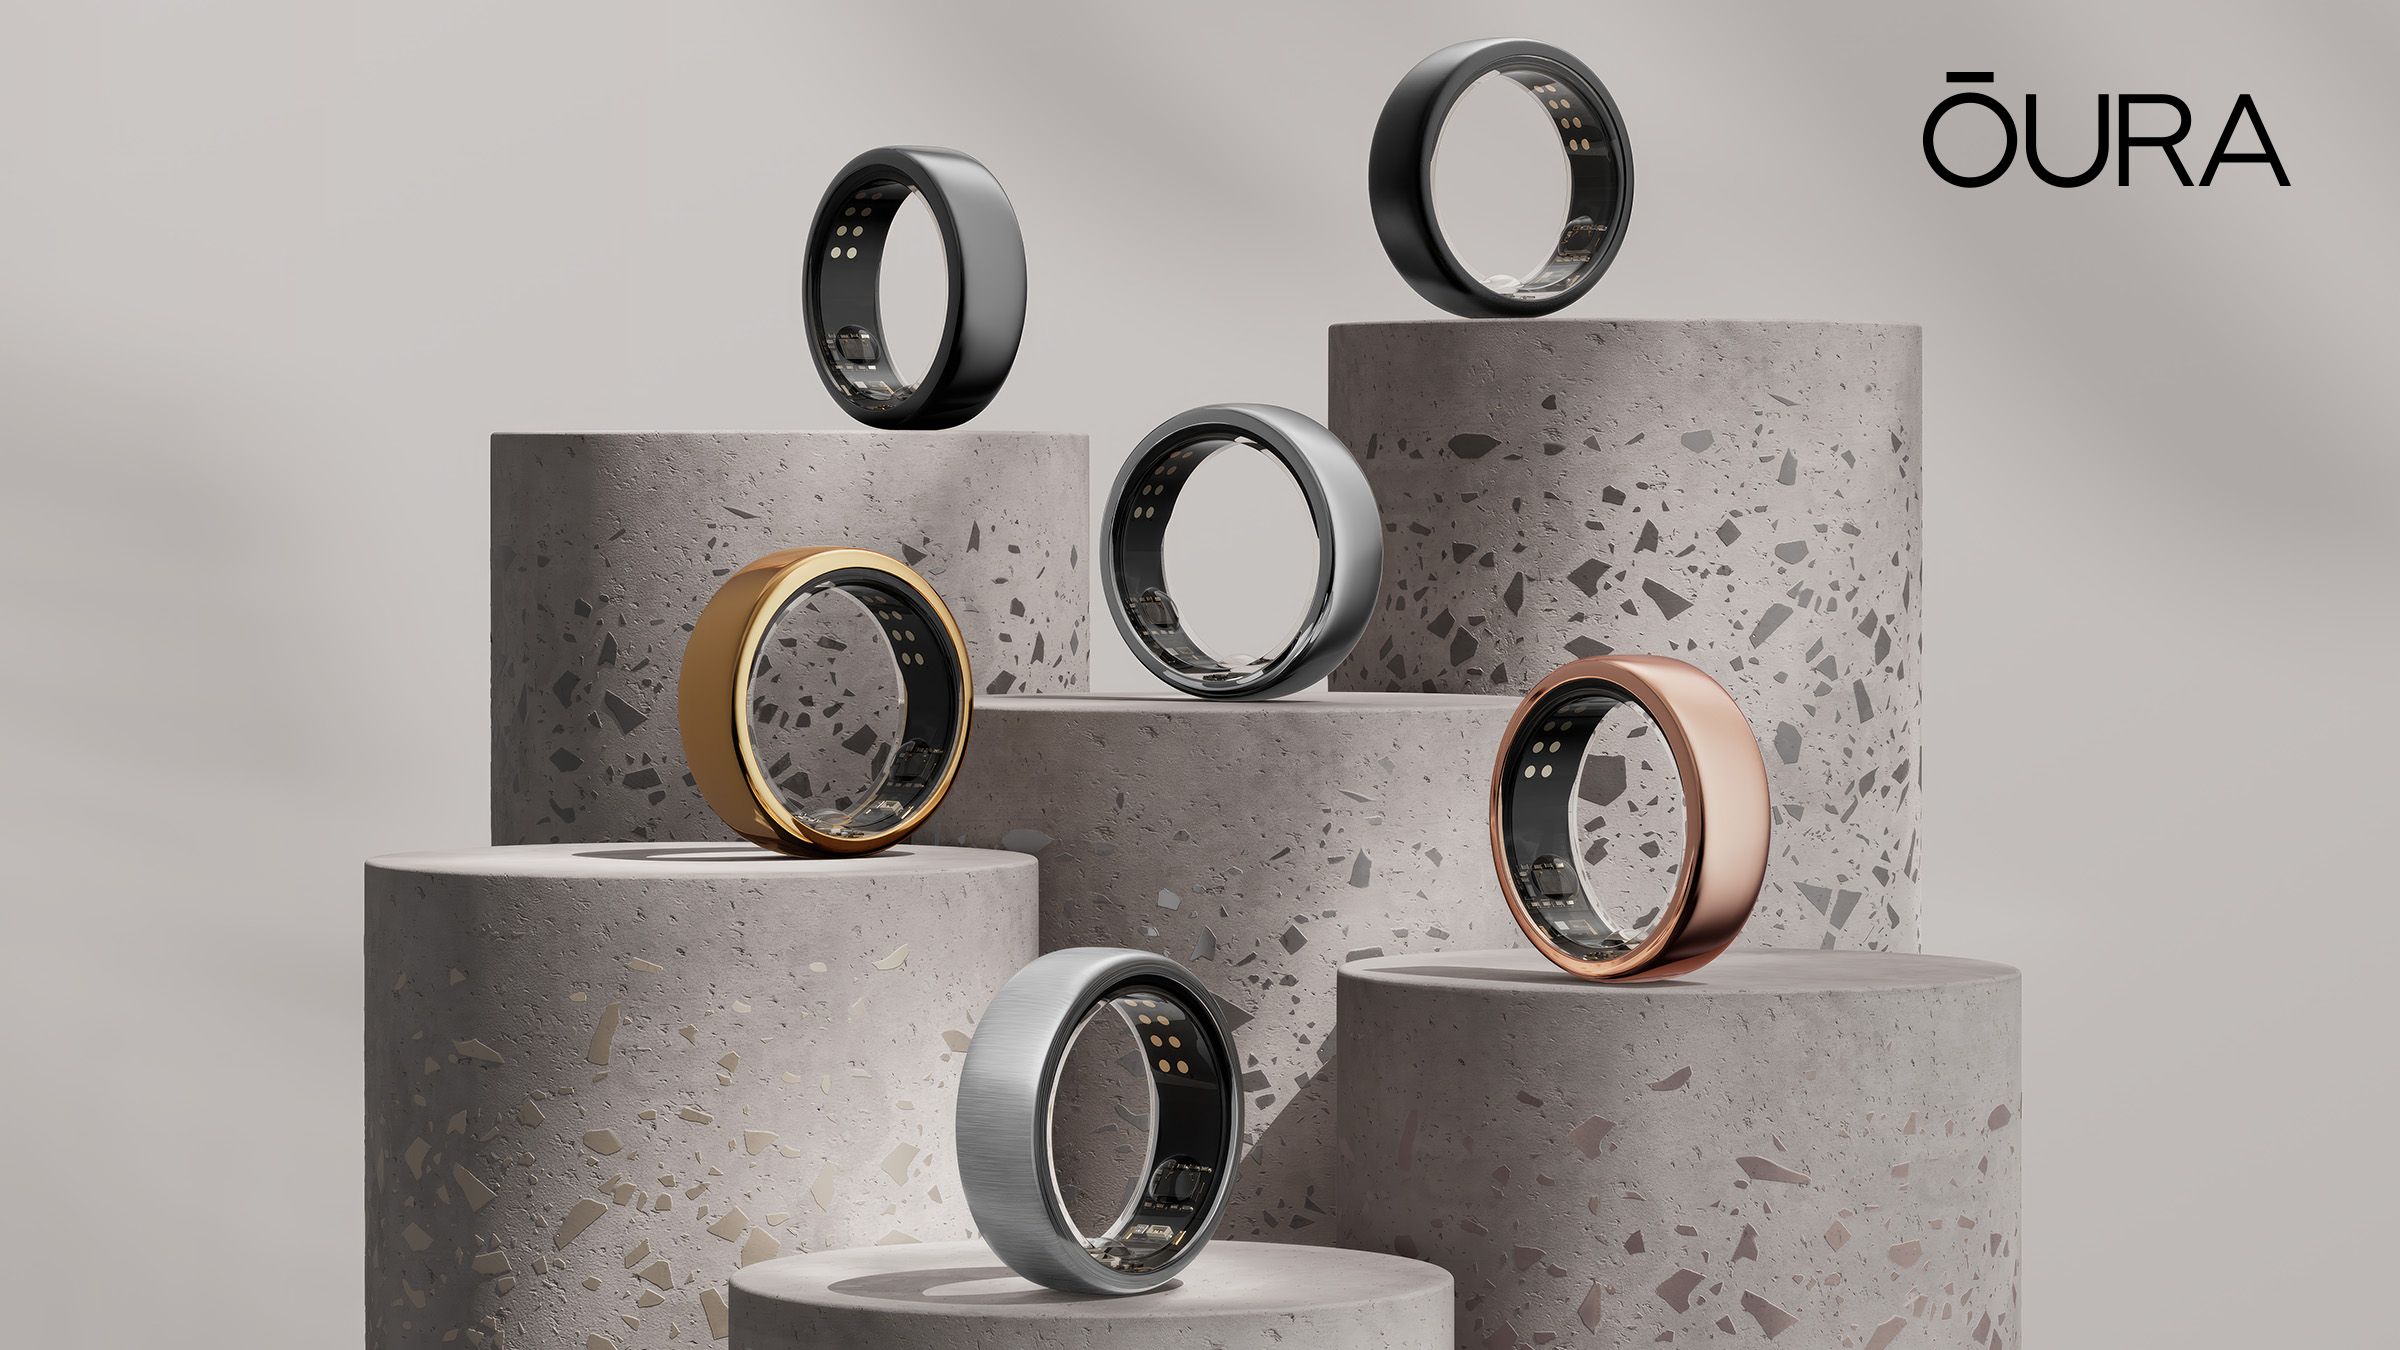 Oura rings on stone pedestals